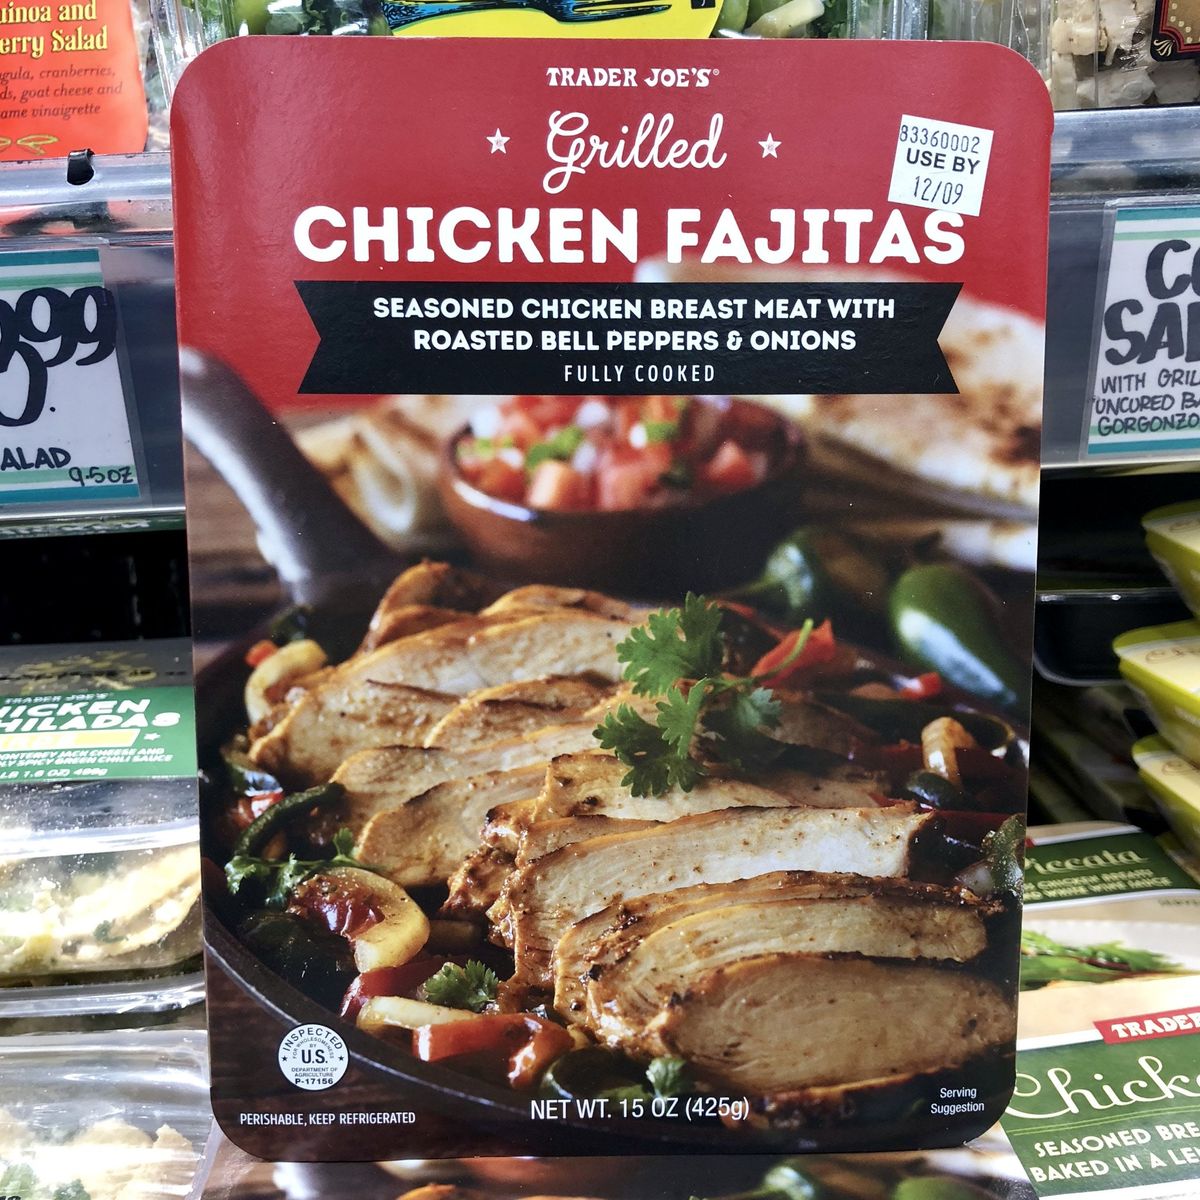 These Low-Carb Trader Joe’s Meals Let You Stay Keto on the Quick